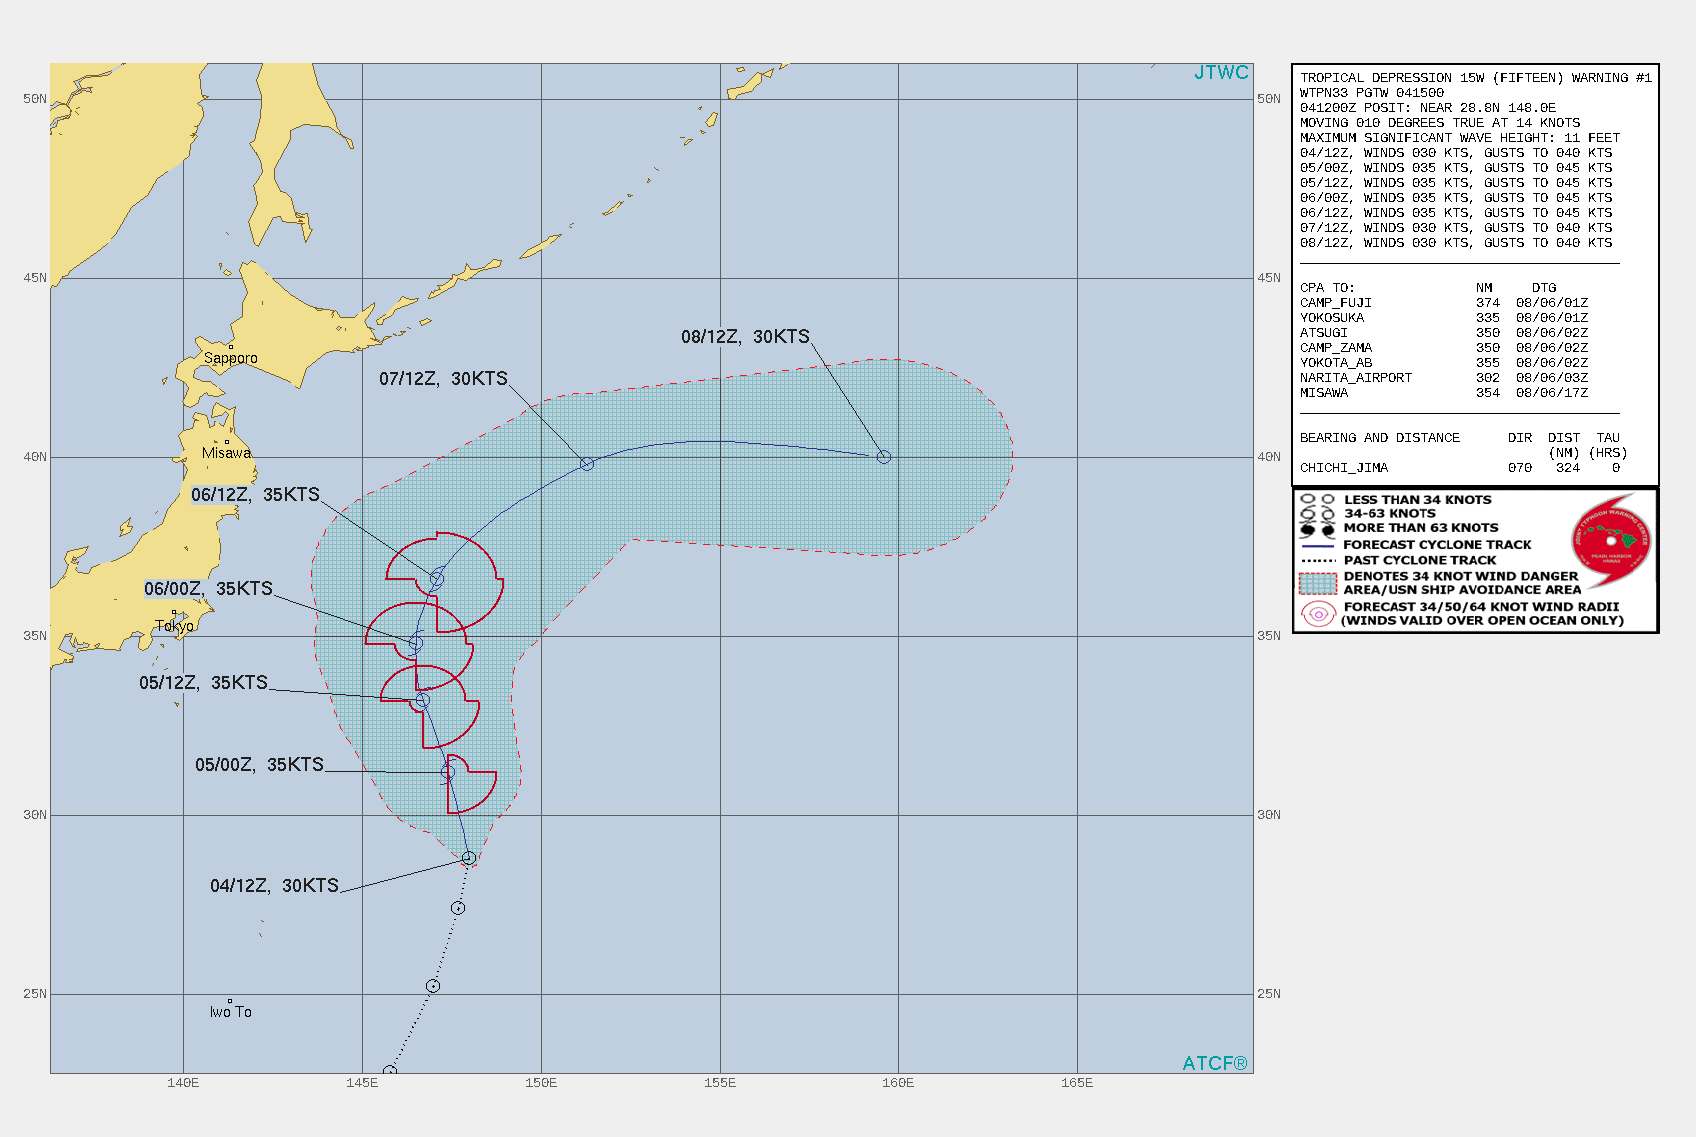 TD 15W. WARNING 1 ISSUED AT 04/15UTC.SIGNIFICANT FORECAST CHANGES: THIS INITIAL PROGNOSTIC REASONING MESSAGE ESTABLISHES THE FORECAST PHILOSOPHY.  FORECAST DISCUSSION: TD 15W WILL CONTINUE ON ITS CURRENT TRACK ALONG THE WESTERN PERIPHERY OF THE SUBTROPICAL RIDGE(STR). AFTER 36H, IT WILL BEGIN TO ROUND THE STR AXIS THEN ACCELERATE NORTHEASTWARD THEN EASTWARD. AS THE SYSTEM TRACKS POLEWARD, VERTICAL WIND SHEAR(VWS) WILL INCREASE AS IT APPROACHES THE PREVAILING WESTERLIES. ADDITIONALLY, SSTS WILL BEGIN TO DROP. THE FAVORABLE ENVIRONMENT WILL QUICKLY BECOME MARGINAL BUT WILL STILL  FUEL A SLIGHT INTENSIFICATION TO 35KNOTS FROM 12H TO 36H.  AFTERWARD, THE COMBINED NEGATIVE EFFECTS OF HIGH VWS AND LOW SSTS  WILL ERODE THE SYSTEM. THERE IS A POSSIBILITY THAT THE SYSTEM WILL  DISSIPATE BEFORE THE END OF THE FORECAST PERIOD SHOULD THE MARGINAL  ENVIRONMENT BECOME MORE UNFAVORABLE. OTHERWISE, BY 96H, THE TD  WILL BEGIN EXTRA-TROPICAL TRANSITION (ETT) AND TRANSFORM INTO A GALE- FORCE COLD CORE LOW BY 120H.